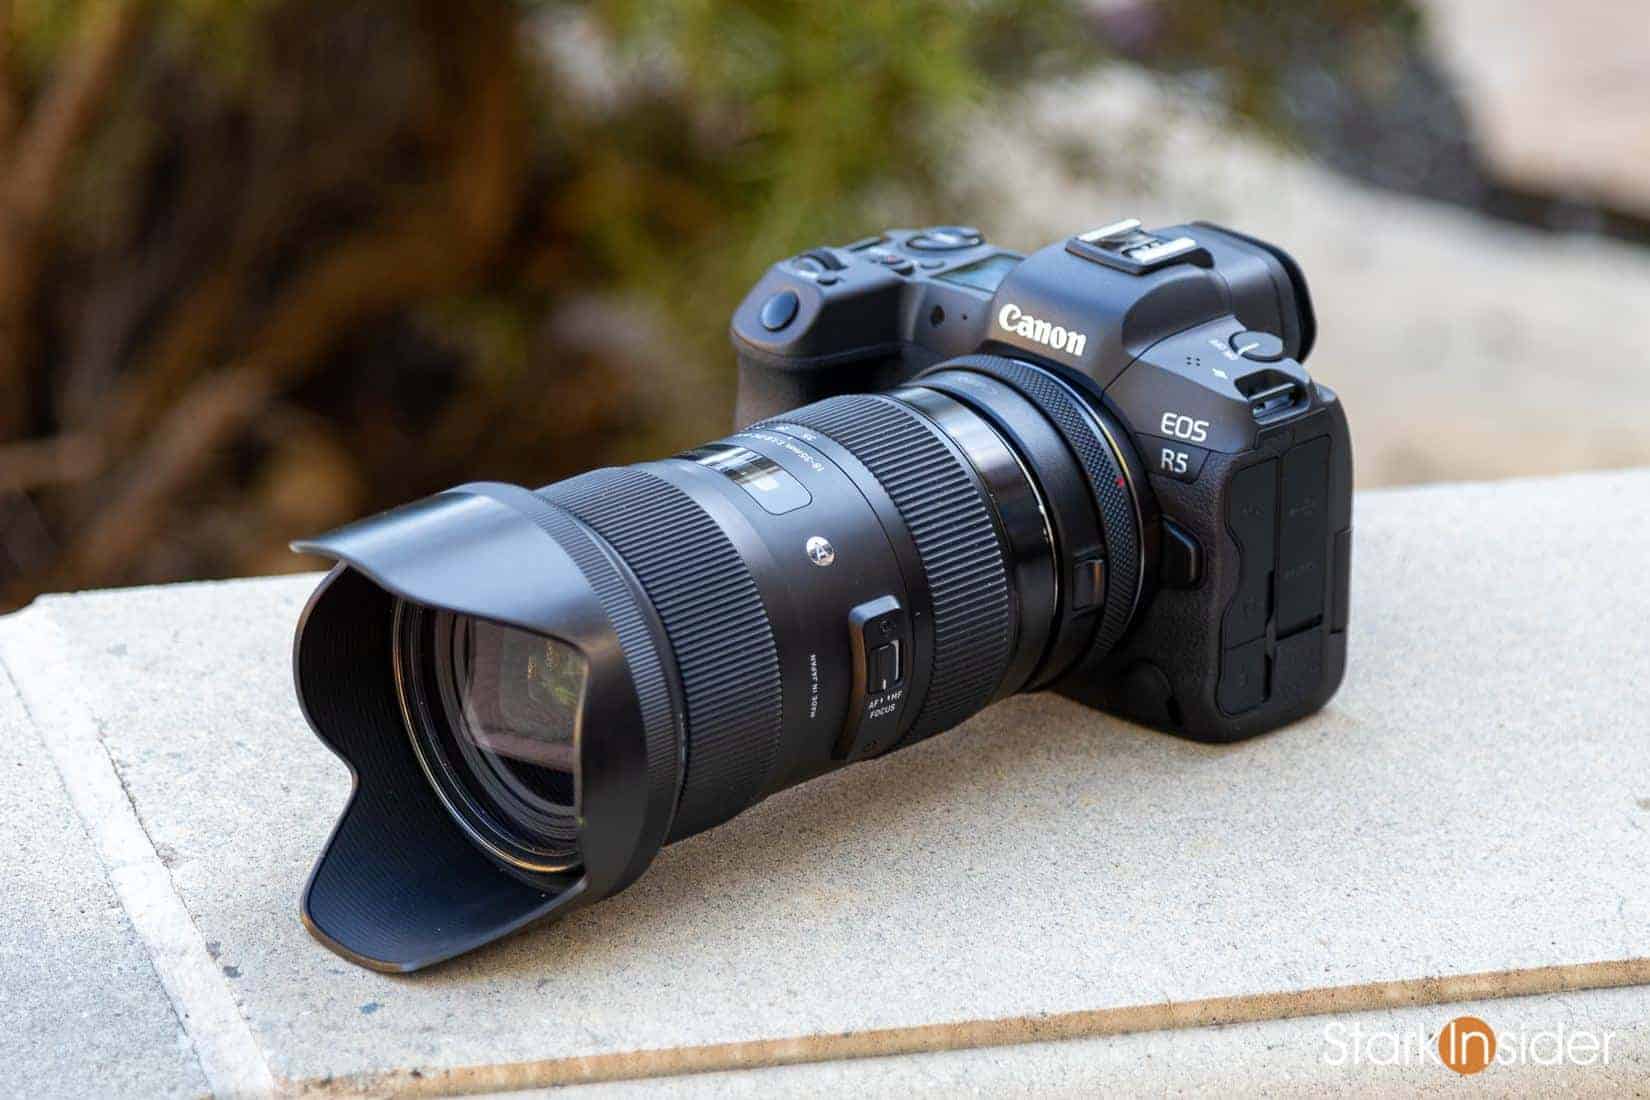 5 best lenses for shooting video with a Canon camera (with video examples)